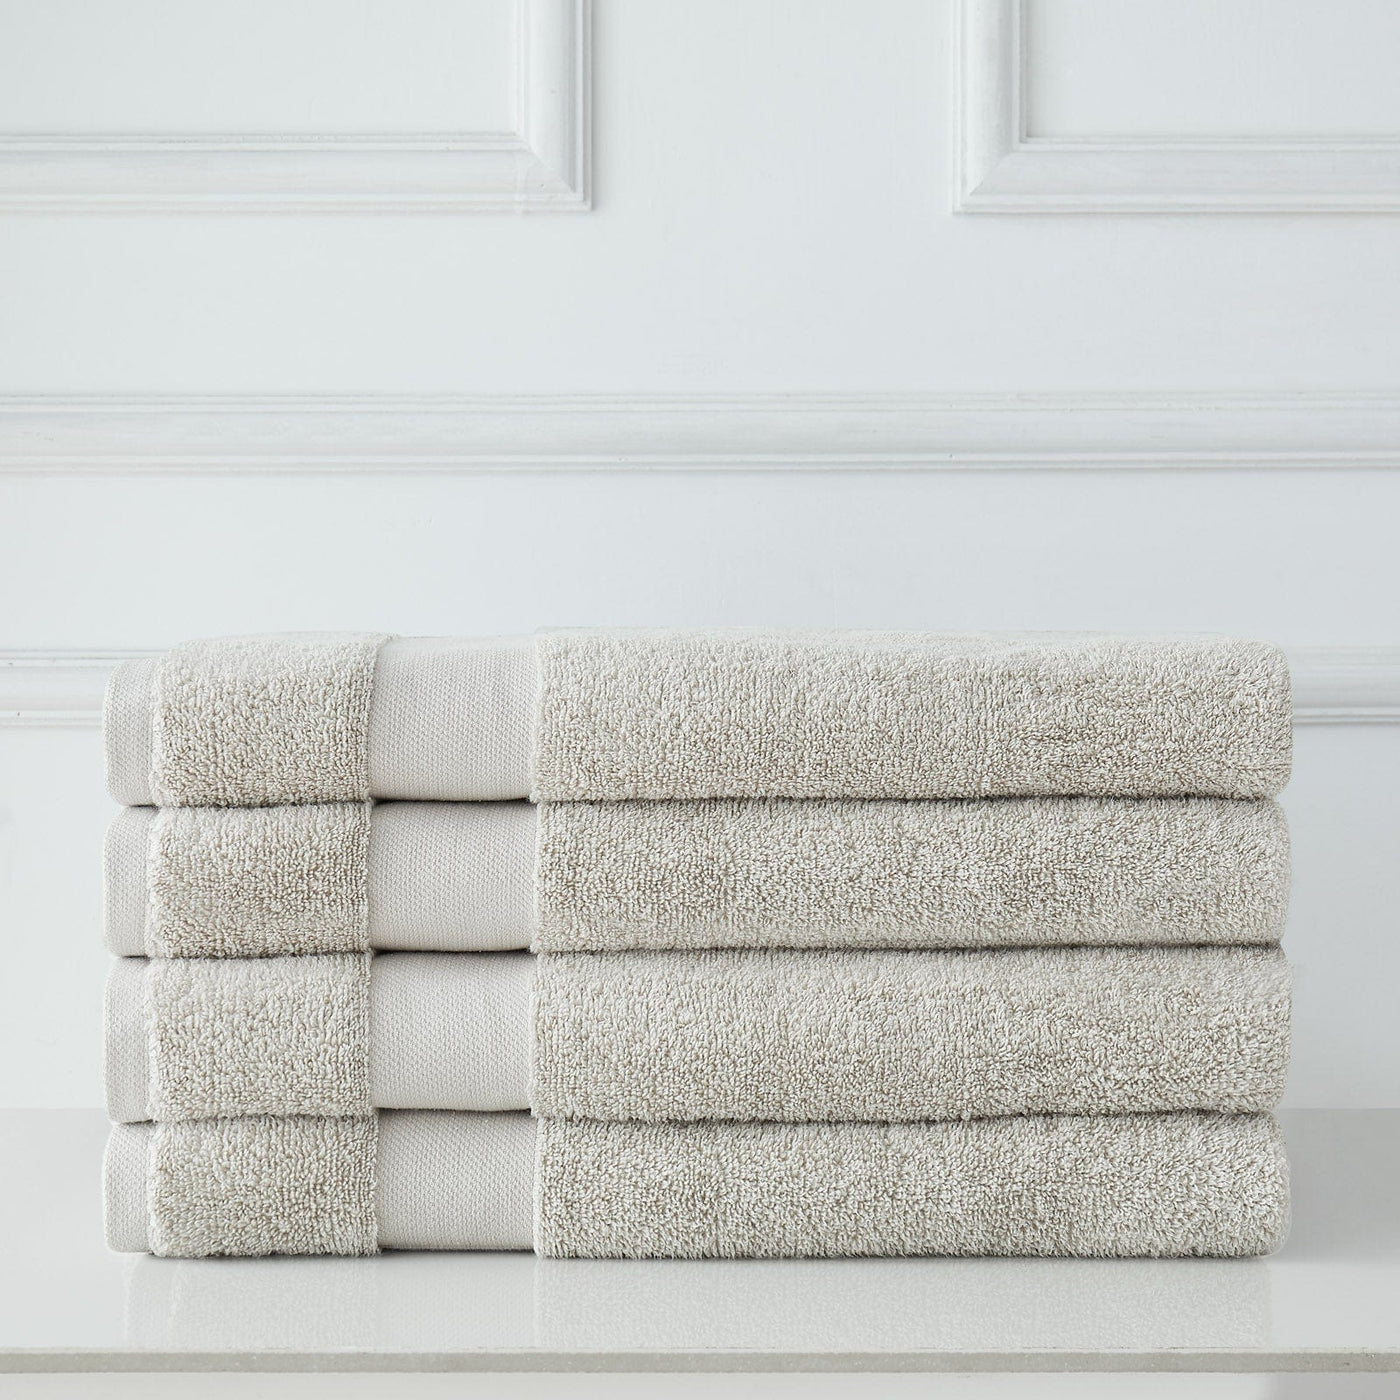 4 Piece of Super-Plush Bath Towel in Warm Sand Stack Together#color_medium-weight-classic-towel-warm-sand